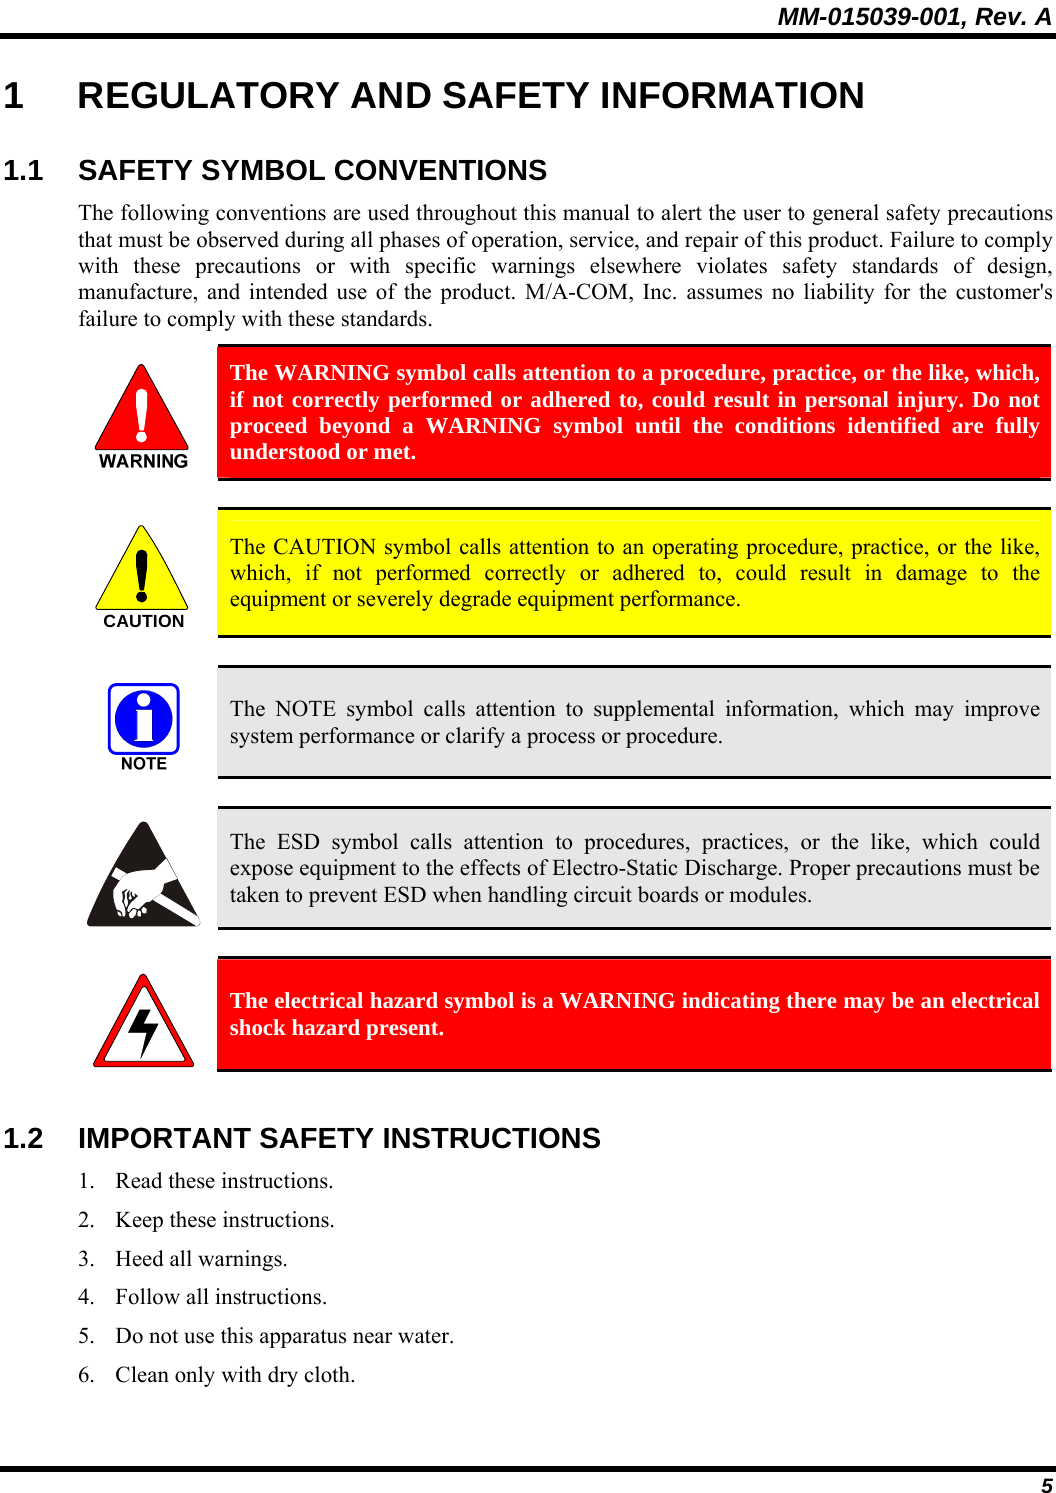 MM-015039-001, Rev. A 5 1  REGULATORY AND SAFETY INFORMATION 1.1 SAFETY SYMBOL CONVENTIONS The following conventions are used throughout this manual to alert the user to general safety precautions that must be observed during all phases of operation, service, and repair of this product. Failure to comply with these precautions or with specific warnings elsewhere violates safety standards of design, manufacture, and intended use of the product. M/A-COM, Inc. assumes no liability for the customer&apos;s failure to comply with these standards.  The WARNING symbol calls attention to a procedure, practice, or the like, which, if not correctly performed or adhered to, could result in personal injury. Do not proceed beyond a WARNING symbol until the conditions identified are fully understood or met.   CAUTION  The CAUTION symbol calls attention to an operating procedure, practice, or the like, which, if not performed correctly or adhered to, could result in damage to the equipment or severely degrade equipment performance.    The NOTE symbol calls attention to supplemental information, which may improve system performance or clarify a process or procedure.    The ESD symbol calls attention to procedures, practices, or the like, which could expose equipment to the effects of Electro-Static Discharge. Proper precautions must be taken to prevent ESD when handling circuit boards or modules.    The electrical hazard symbol is a WARNING indicating there may be an electrical shock hazard present.  1.2 IMPORTANT SAFETY INSTRUCTIONS 1. Read these instructions. 2. Keep these instructions. 3. Heed all warnings. 4. Follow all instructions. 5. Do not use this apparatus near water. 6. Clean only with dry cloth. 